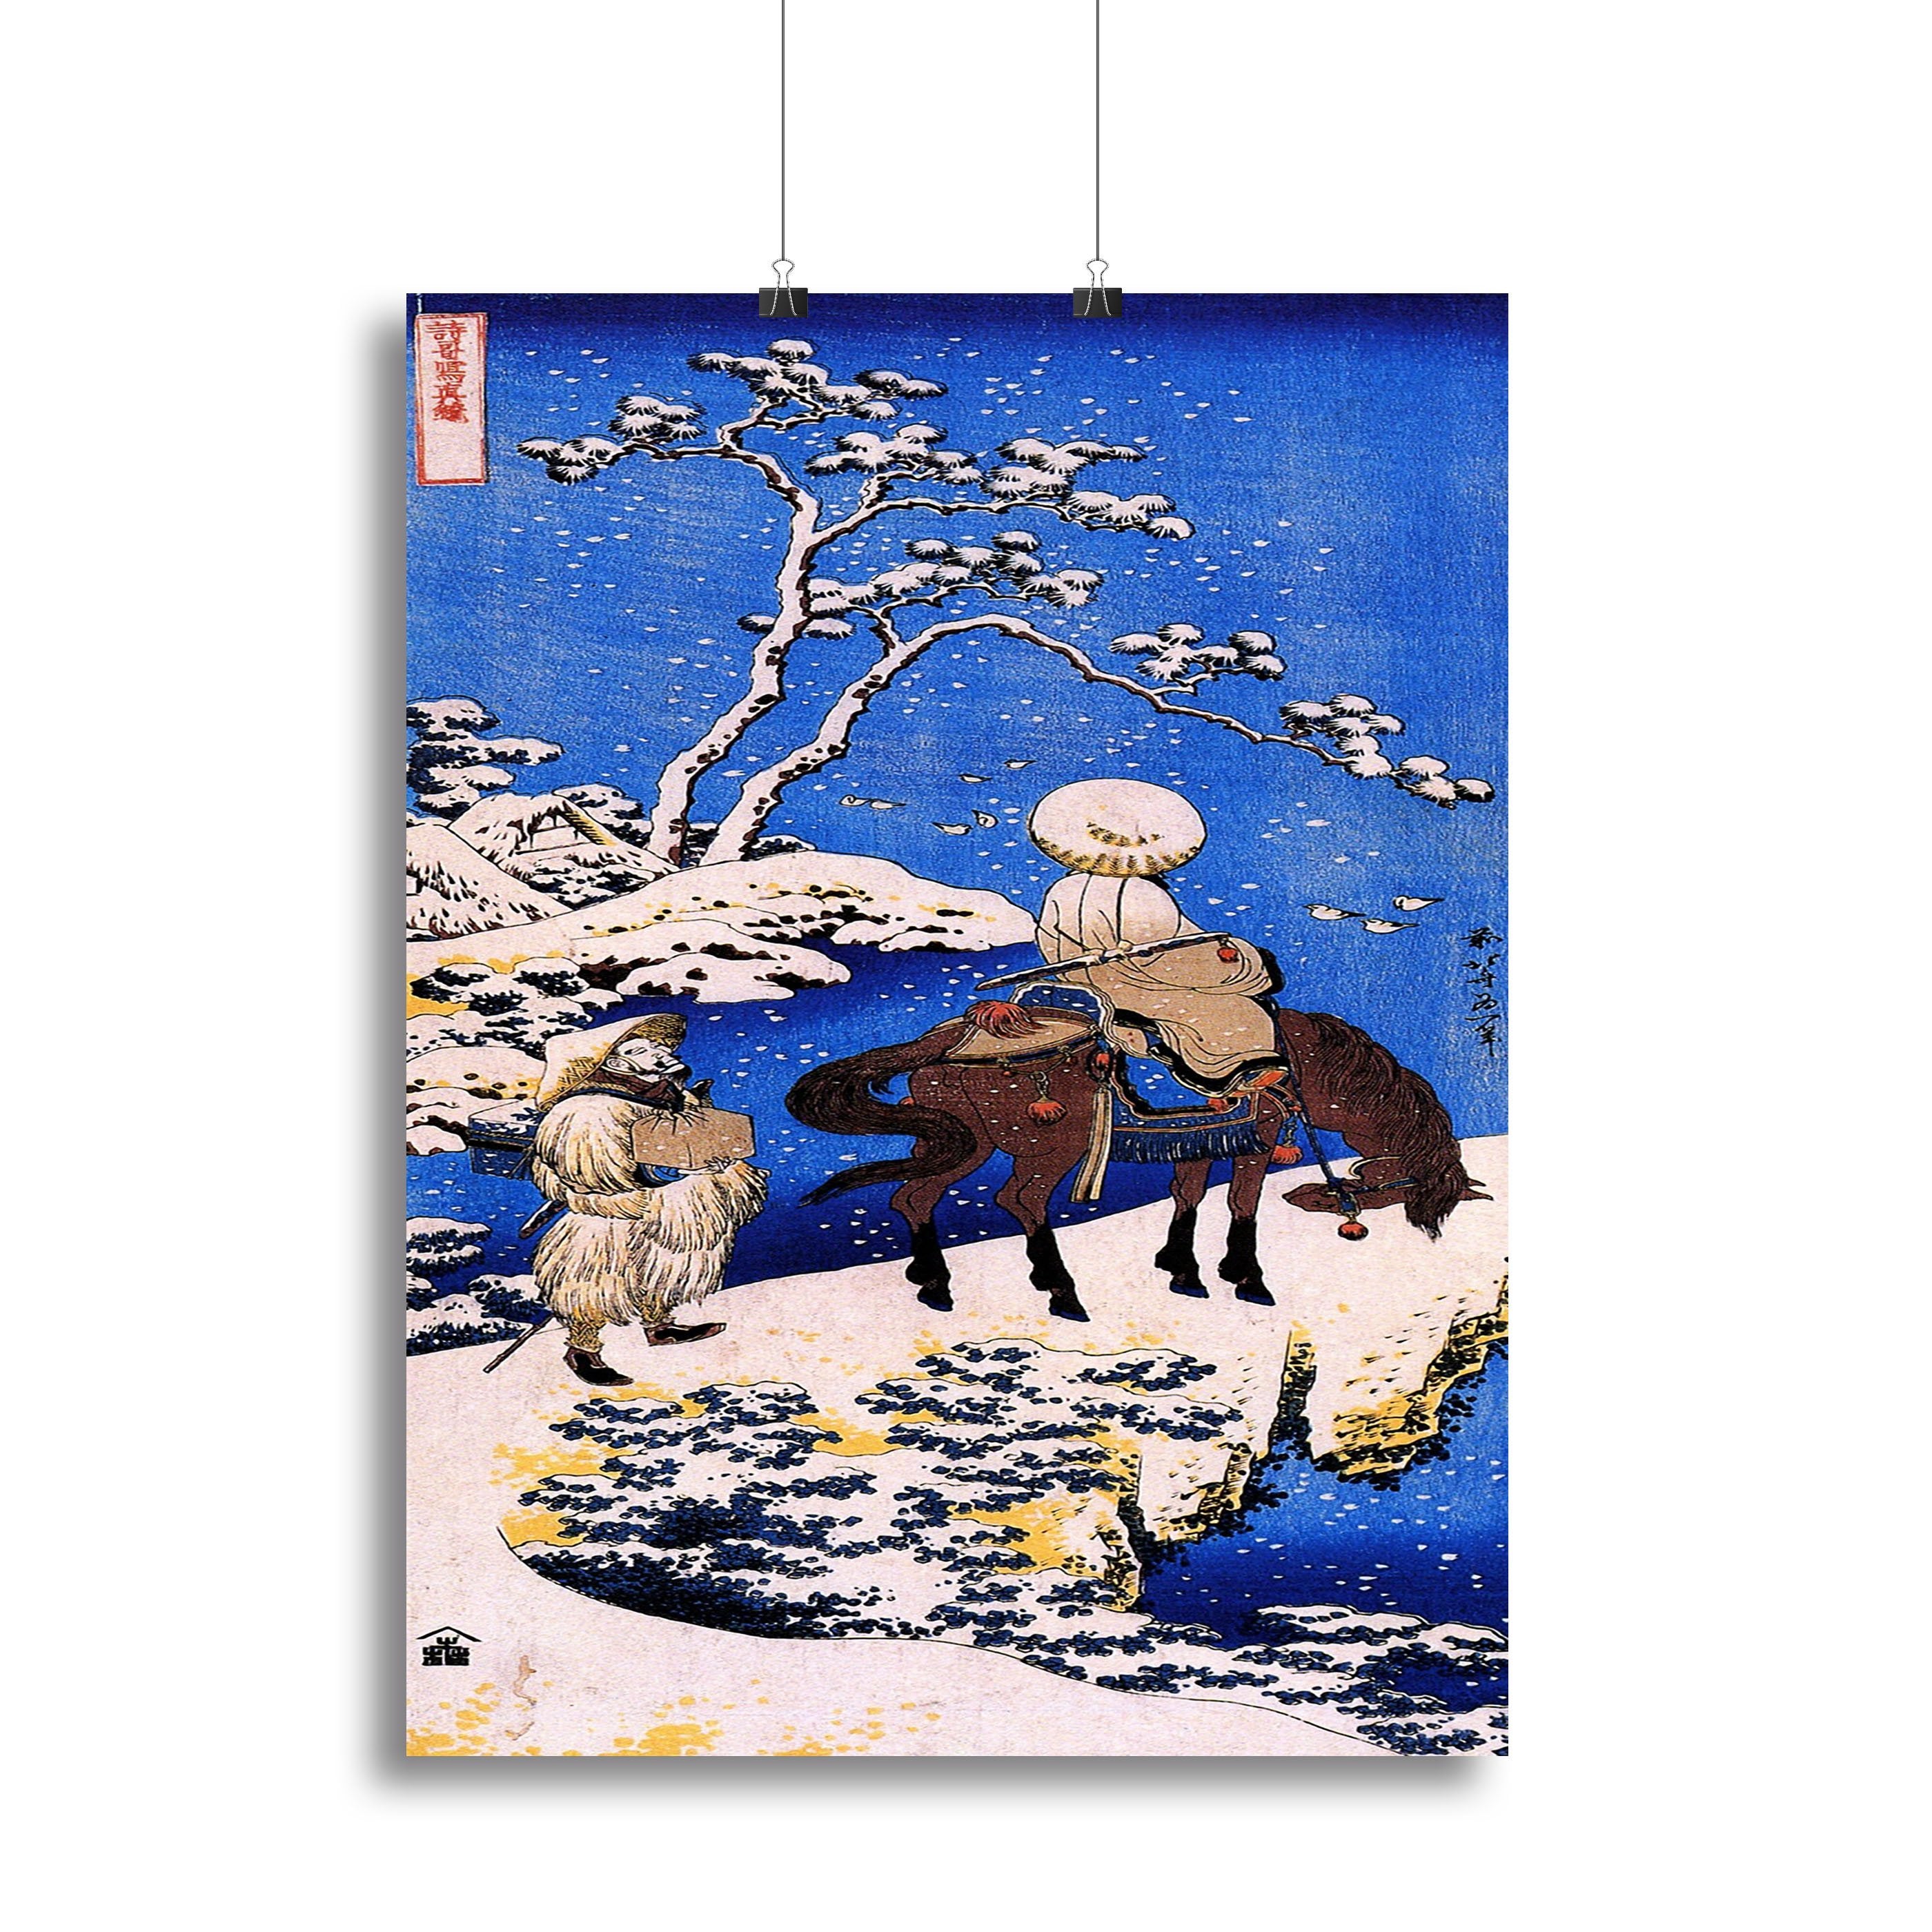 The poet Teba on a horse by Hokusai Canvas Print or Poster